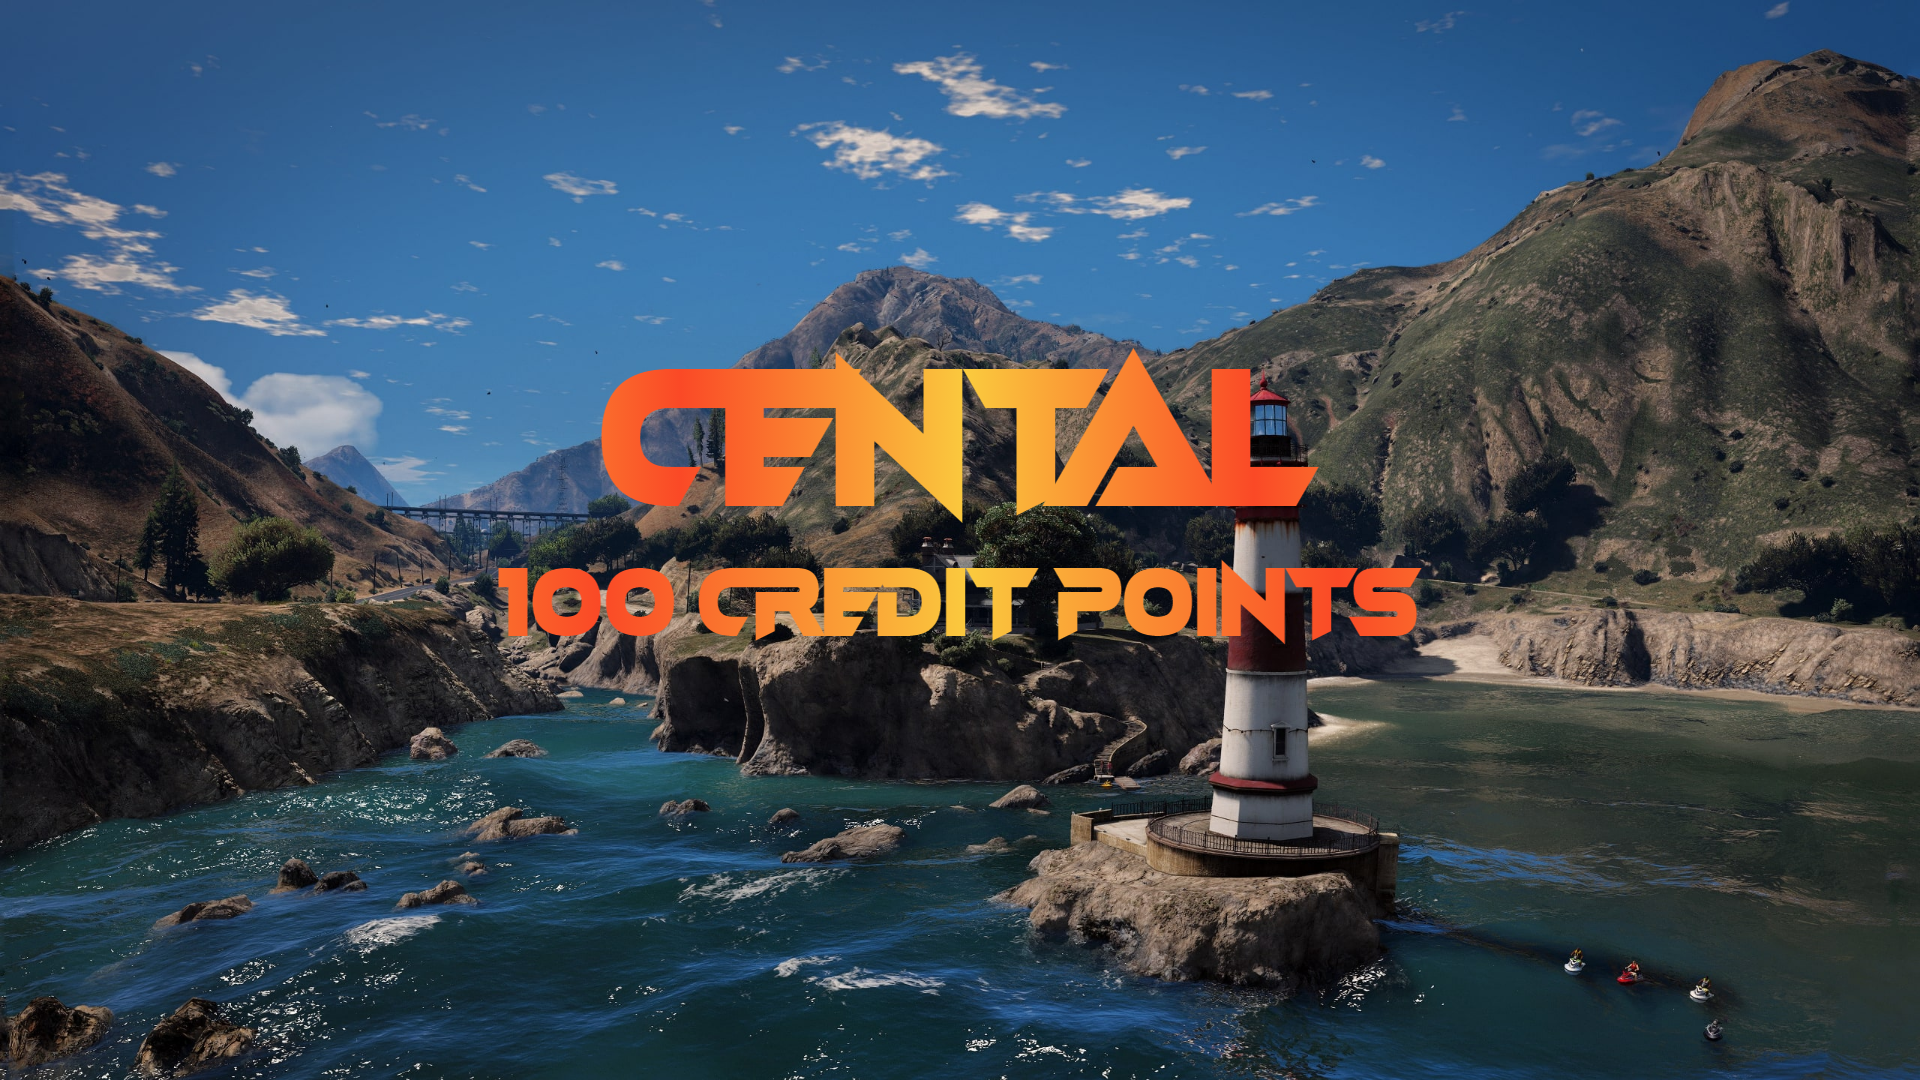 CentralRP - 100 Credit Points Gift Card [USD 11.29]